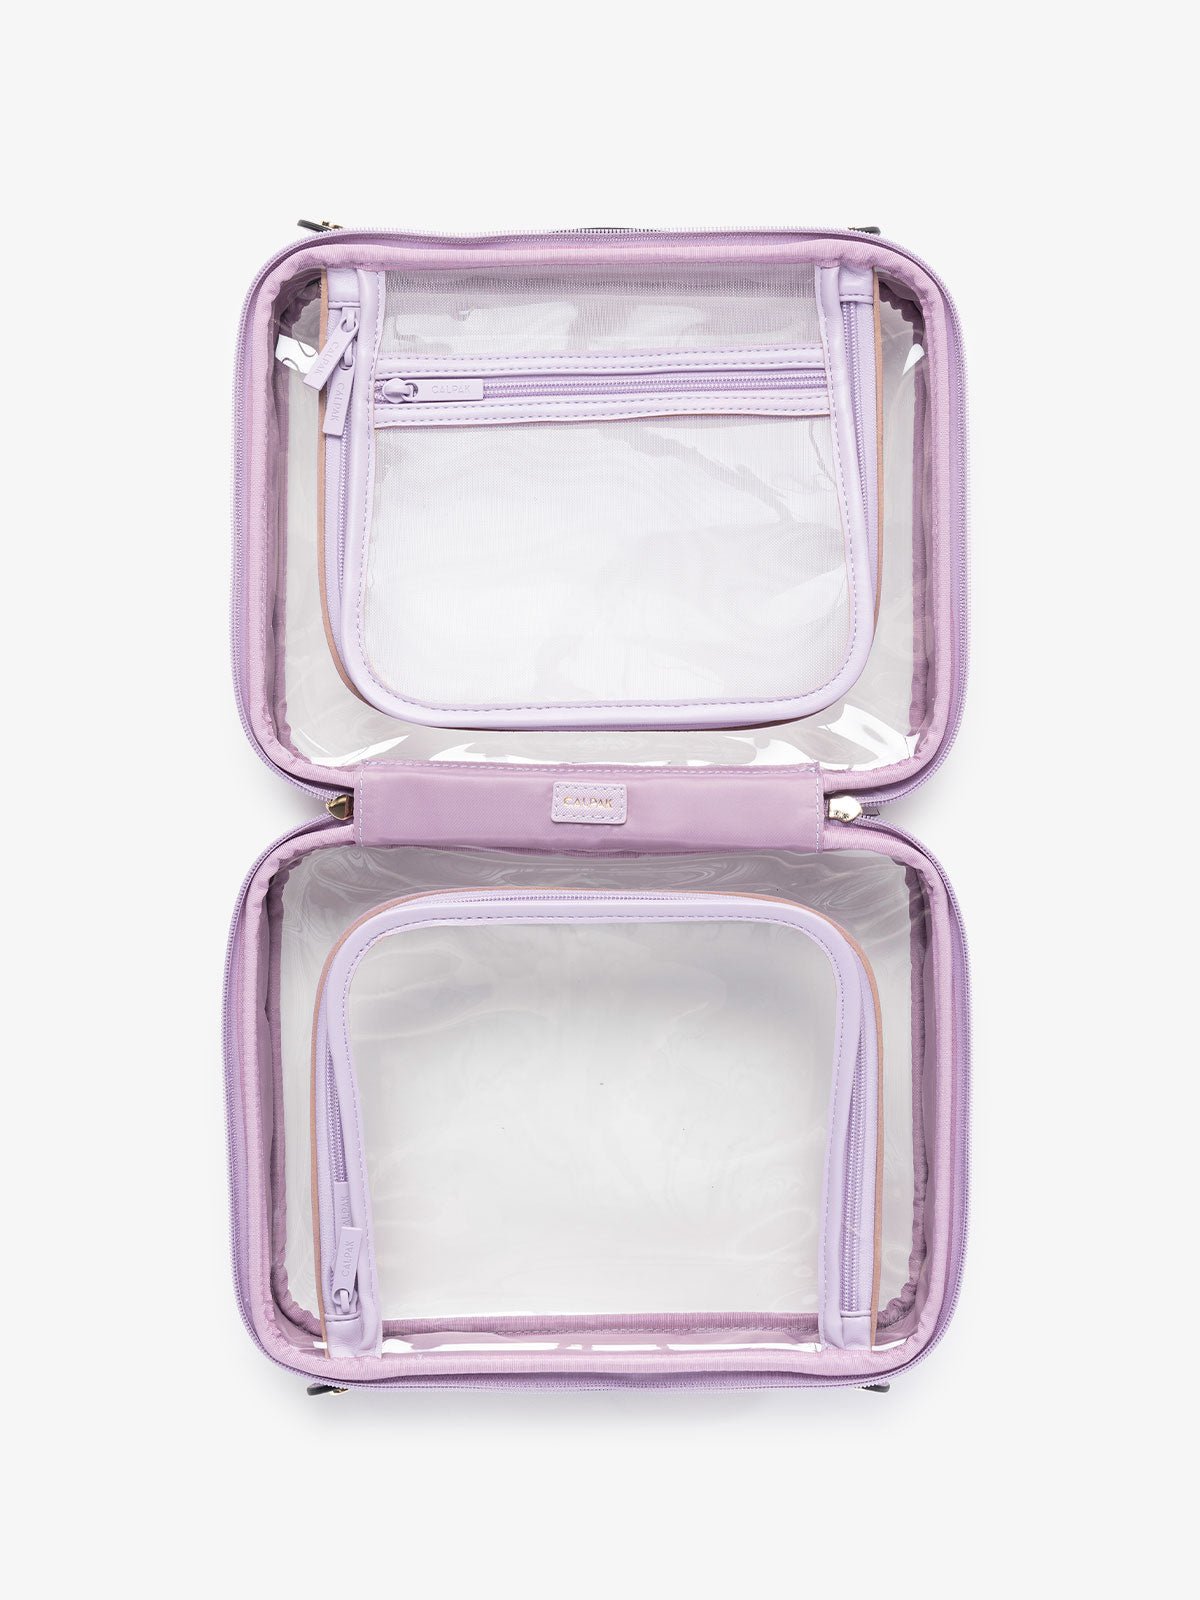 clear makeup bag with compartments